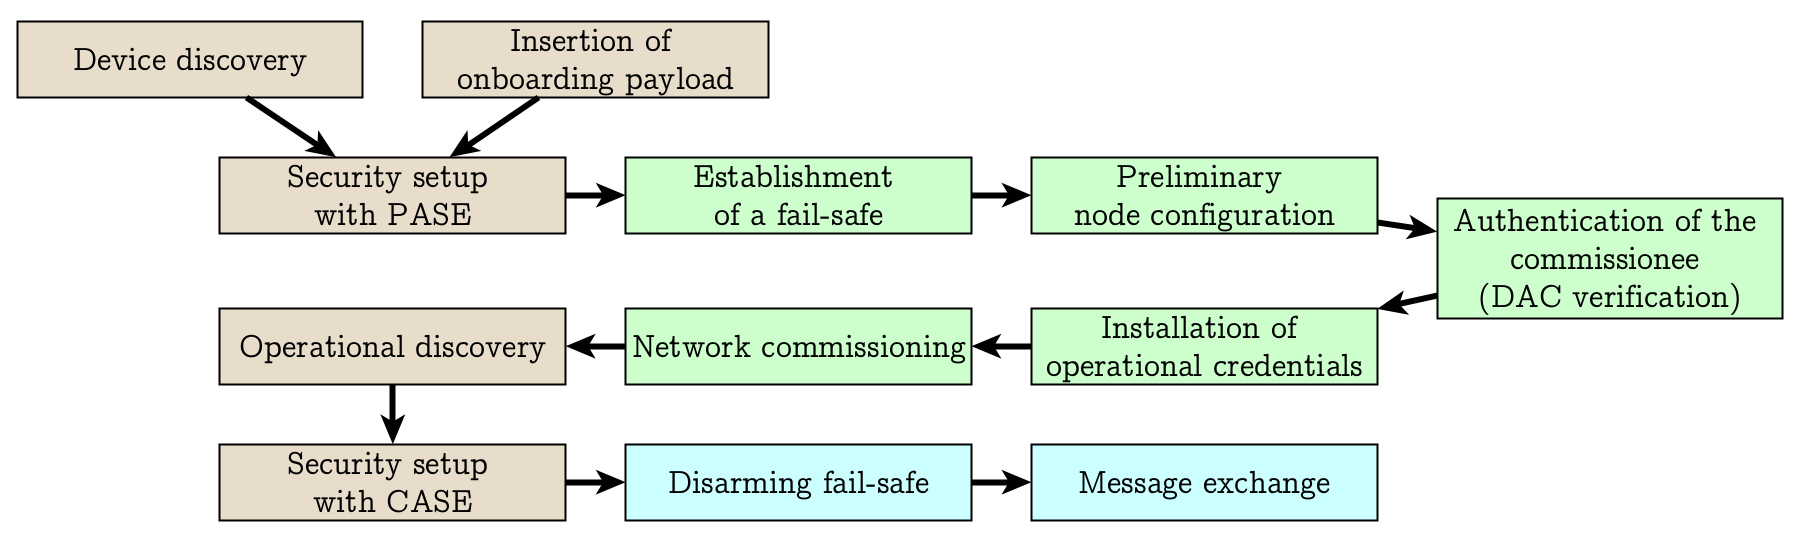 Figure 3: Overview of the commissioning phases. Brown depicts unsecured communication, green is PASE-secured and blue is CASE-secured. Modified version of Nordic Semiconductor's depiction.